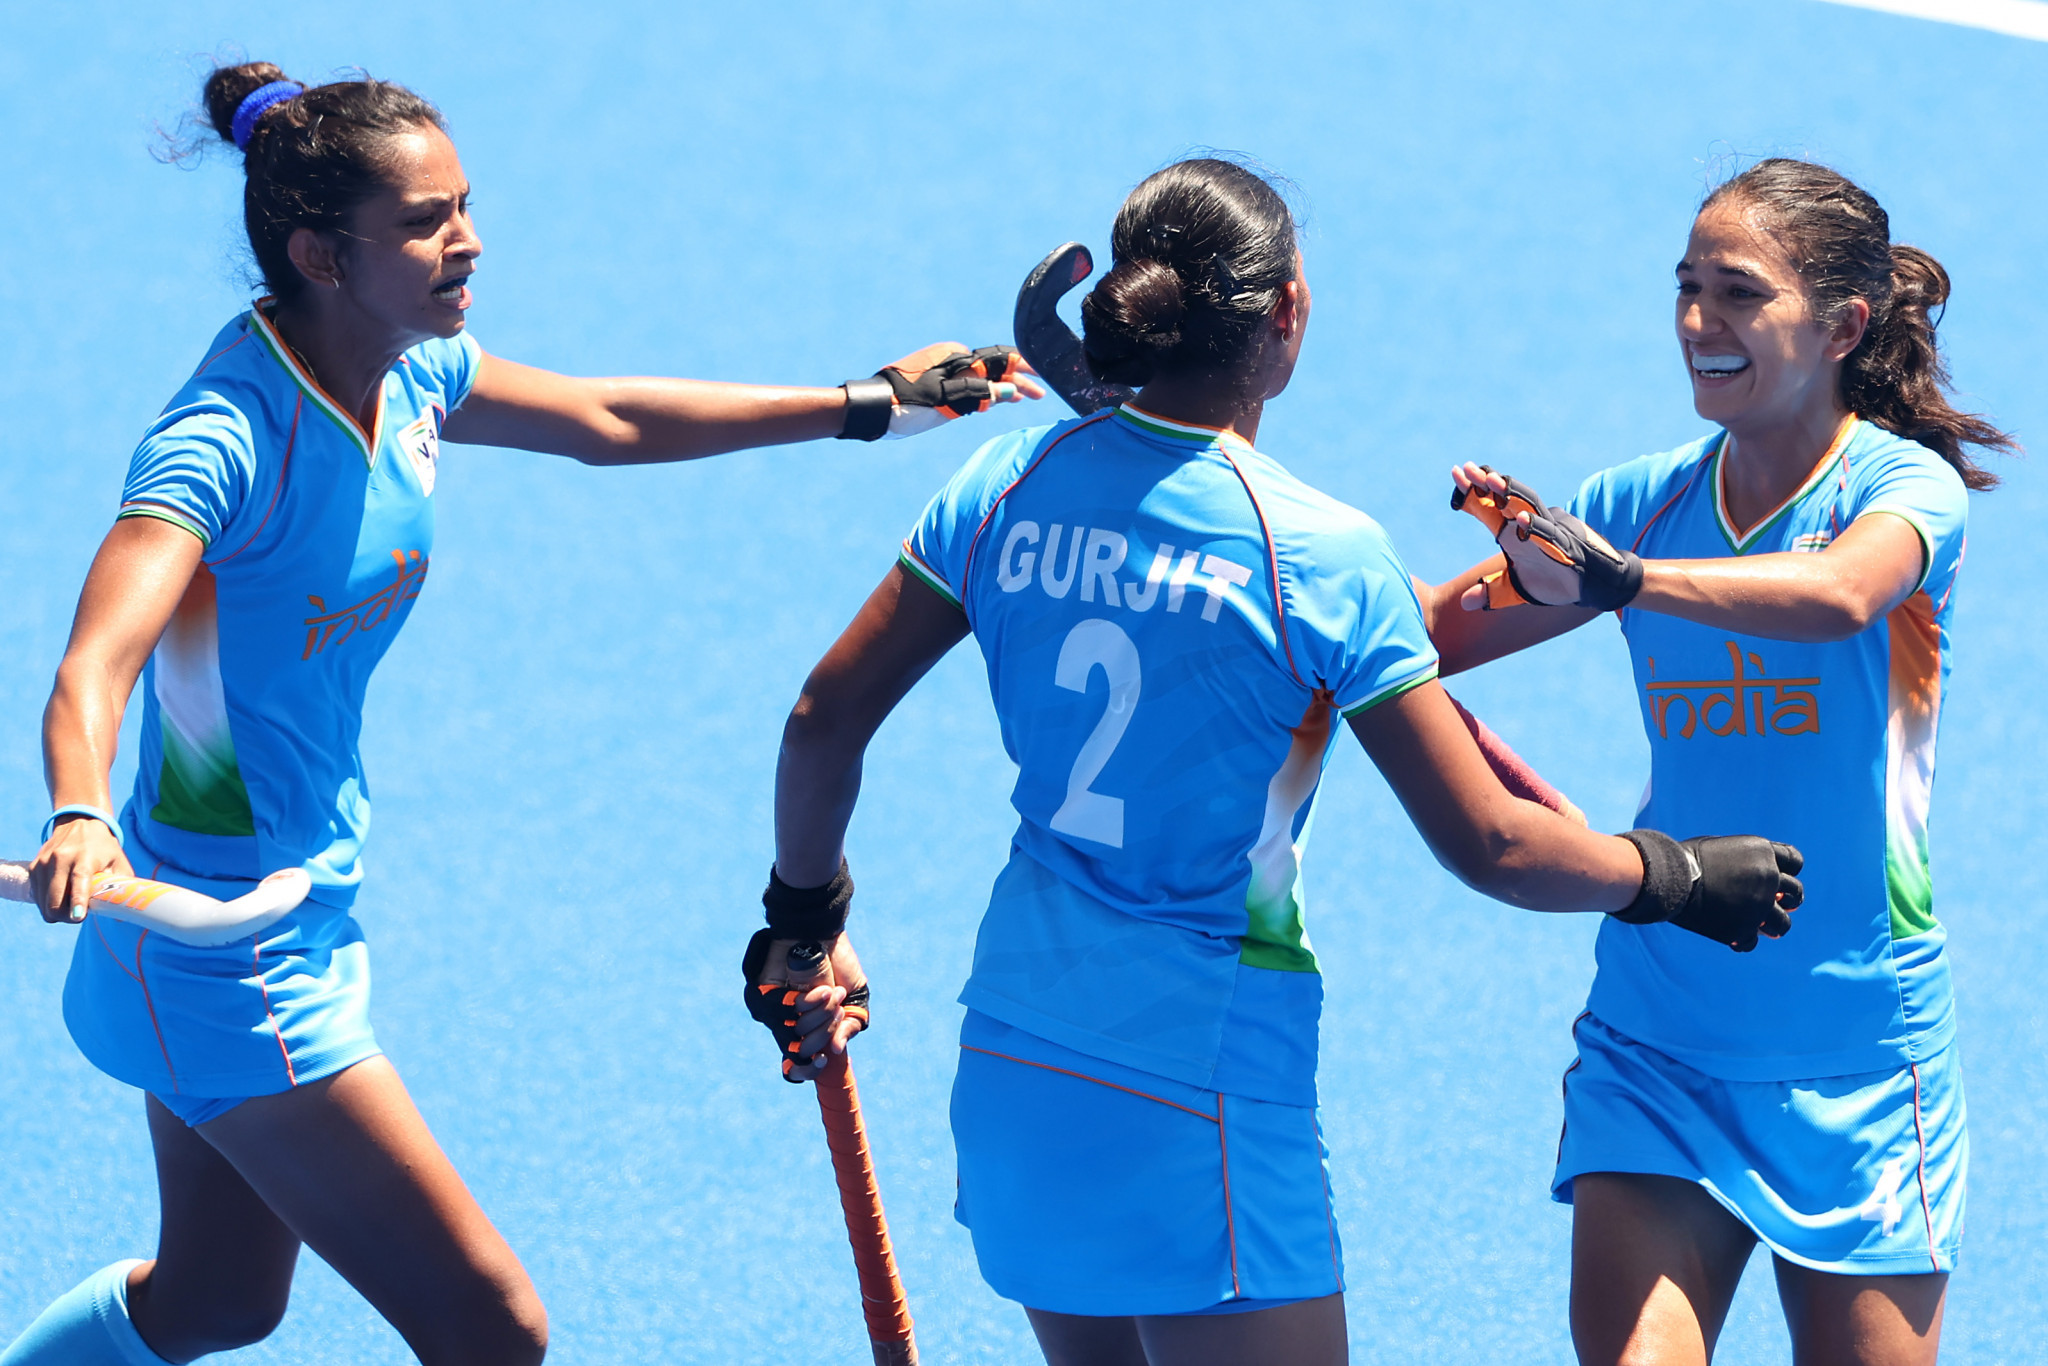 Monika leads India to back-to-back wins over China in Hockey Pro League